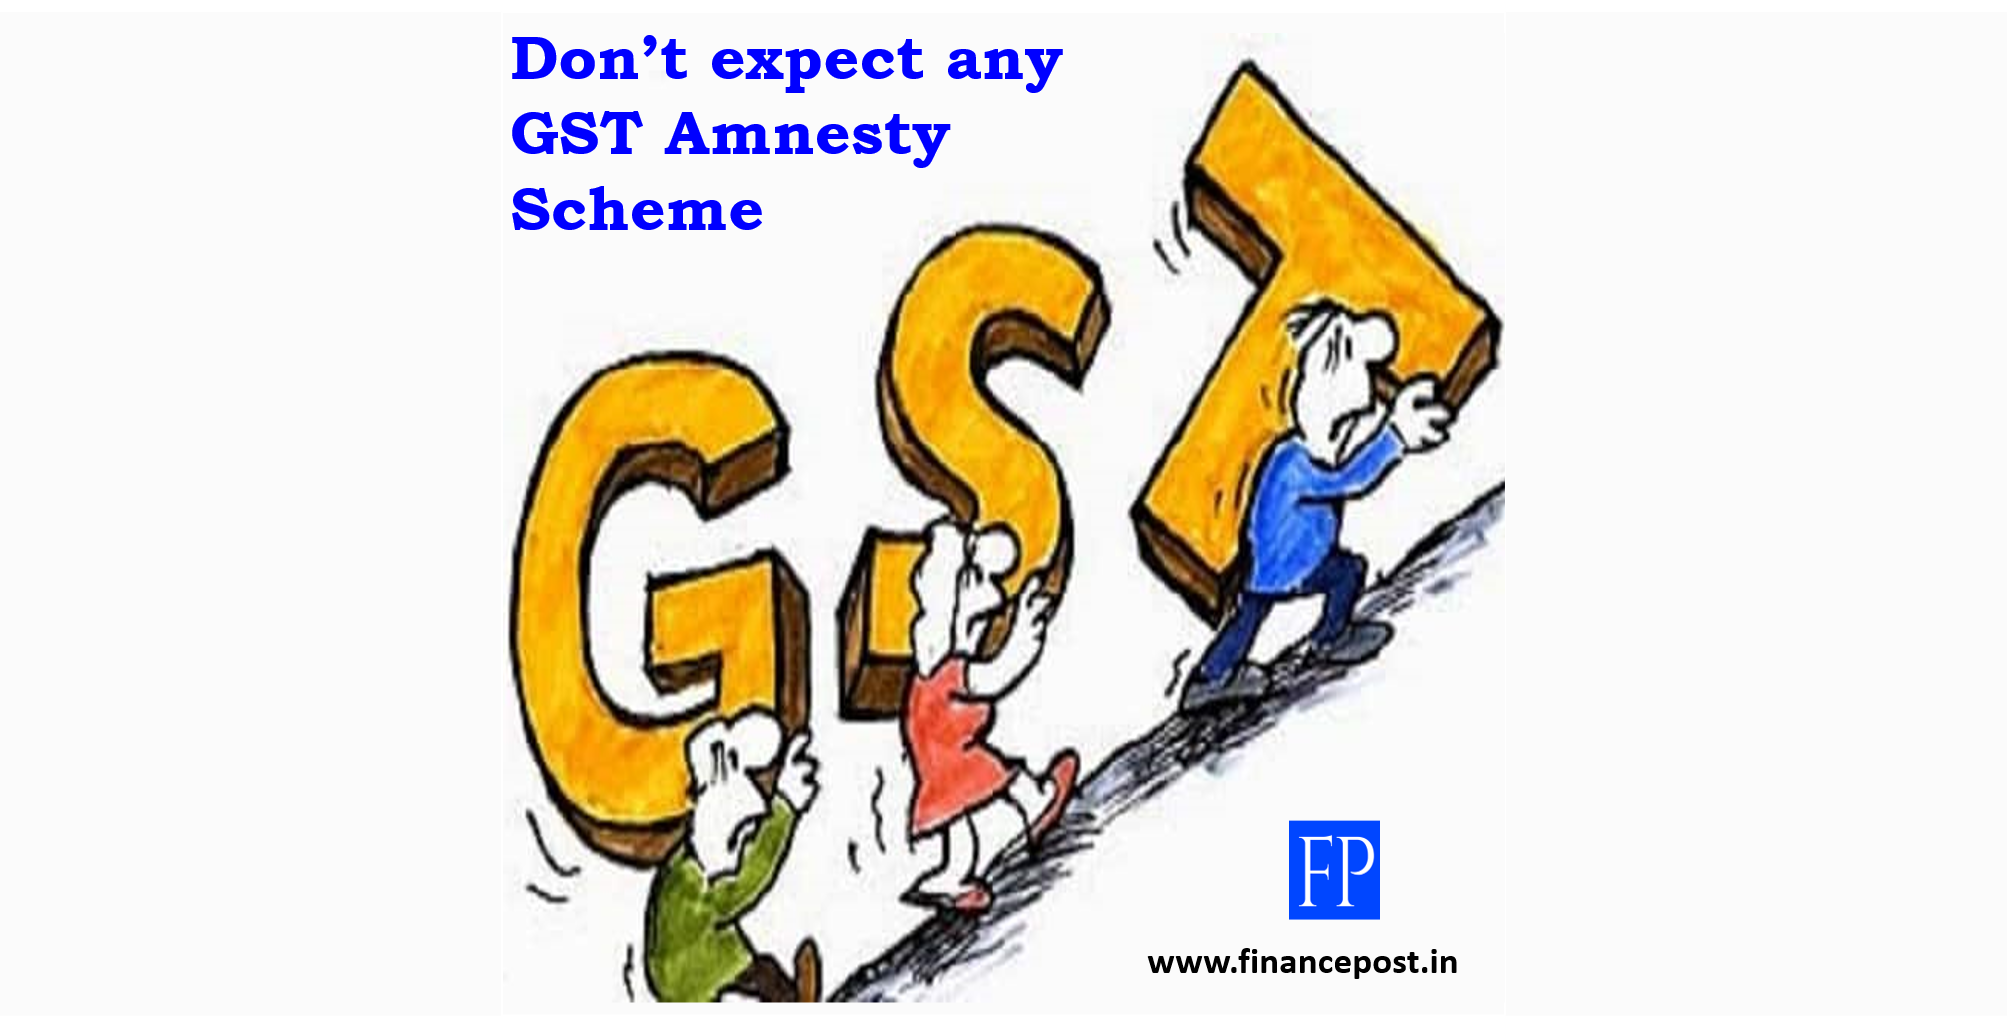 Don’t expect any GST Amnesty Scheme